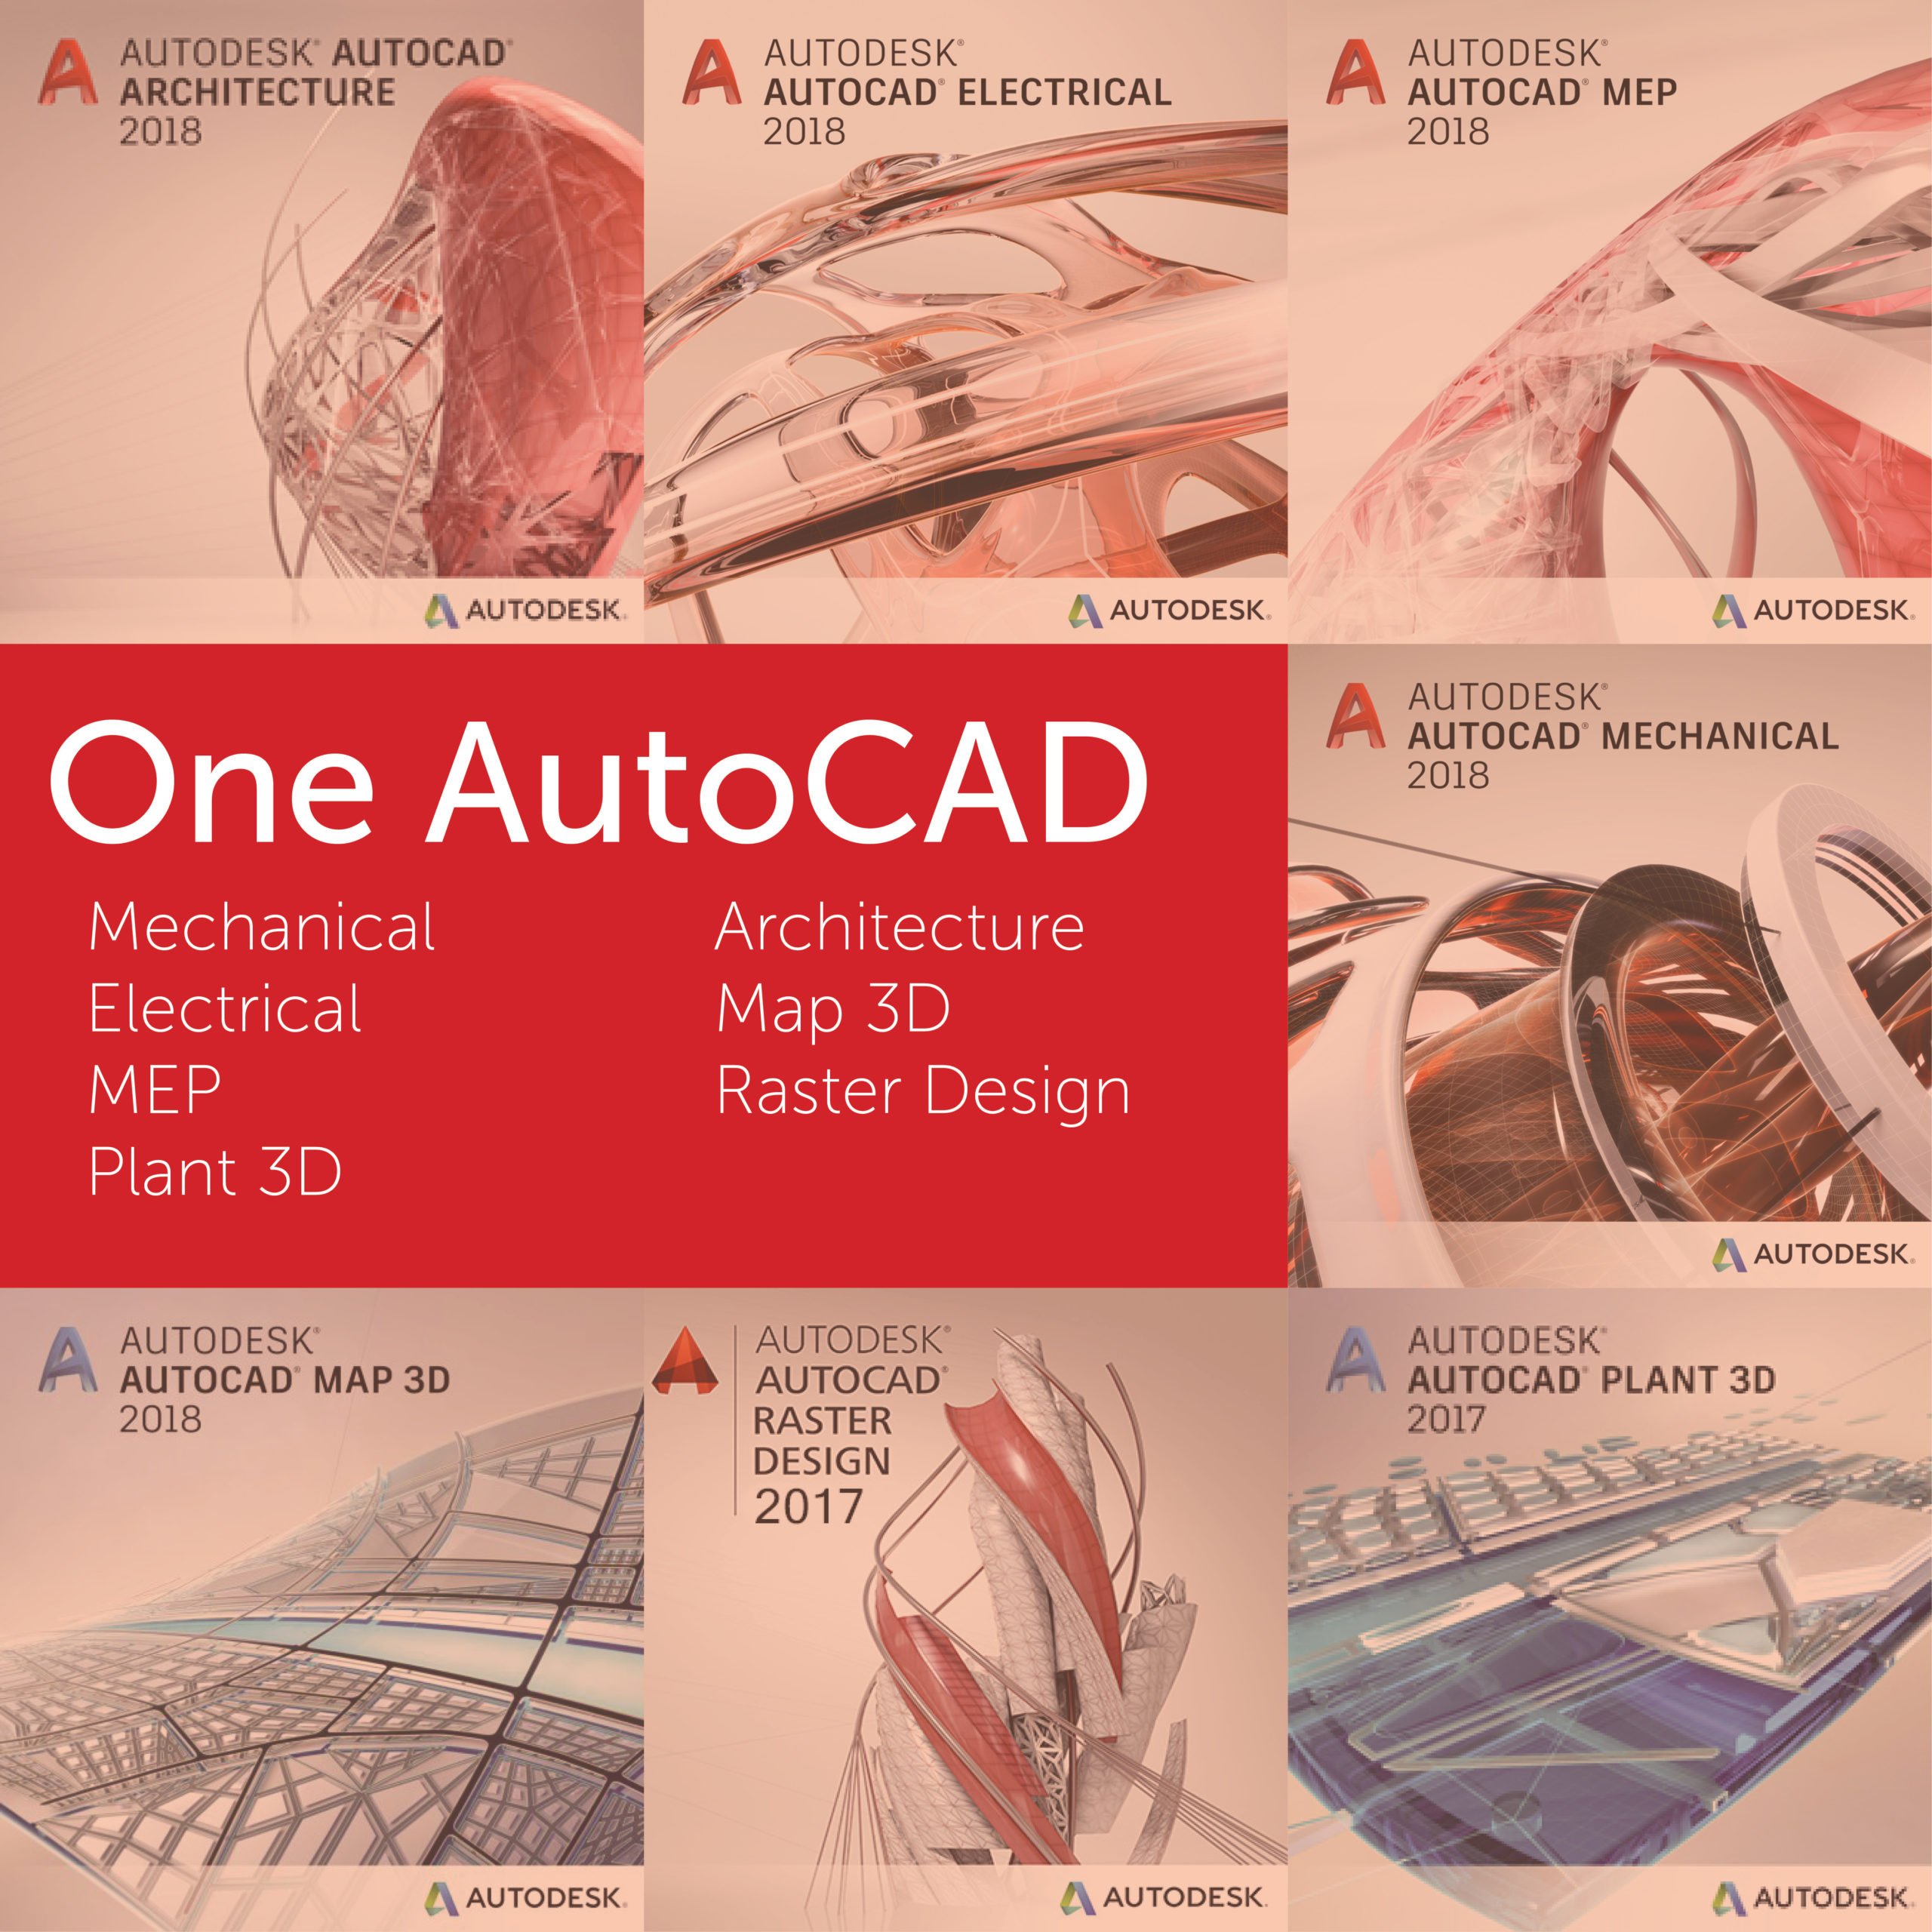 The One and Only AutoCAD – AutoCAD 2019